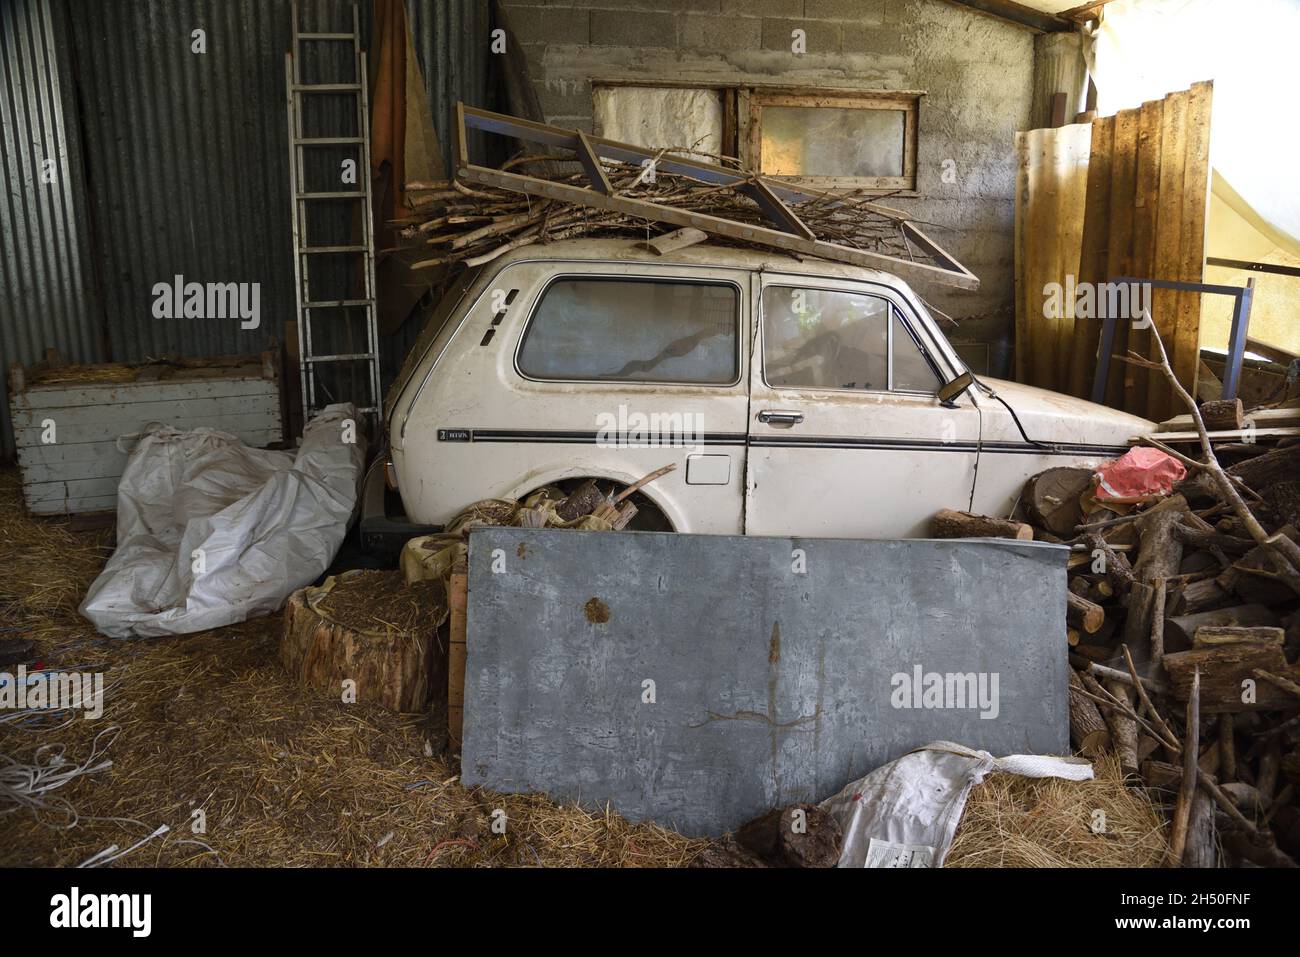 Abandoned Lada Niva in Old or Ramshackle Shed in the Alpes-de-Haute-Provence Provence France Stock Photo